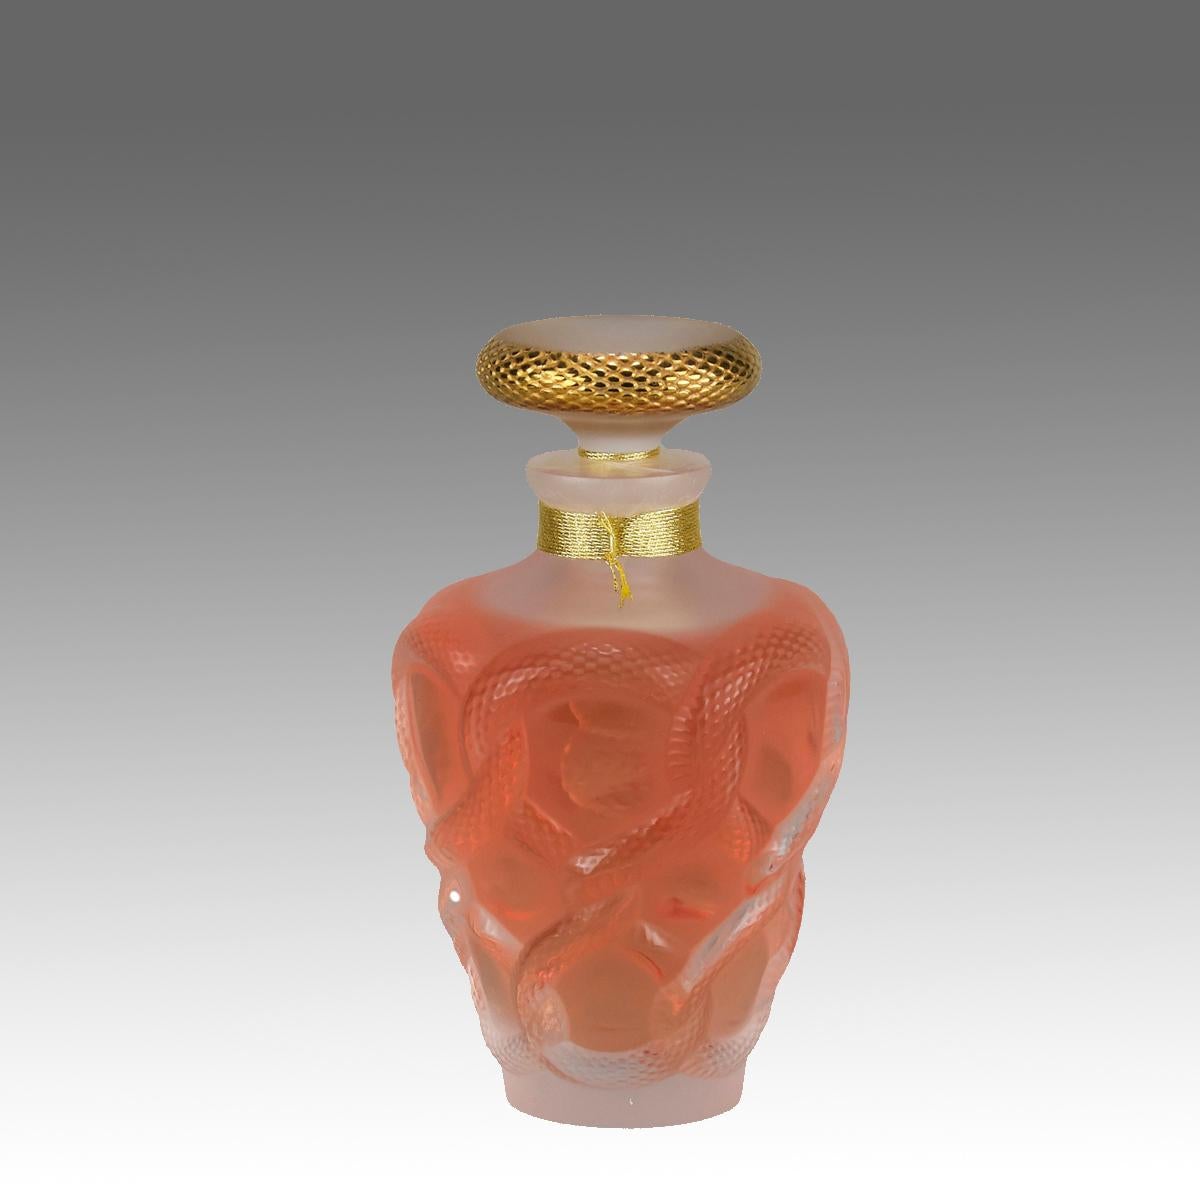 An attractive limited edition clear and frosted glass scent bottle, the clear glass body containing the original Lalique perfume decorated with several raised snake bodies entwined together around the circumference with fine detail, signed Lalique